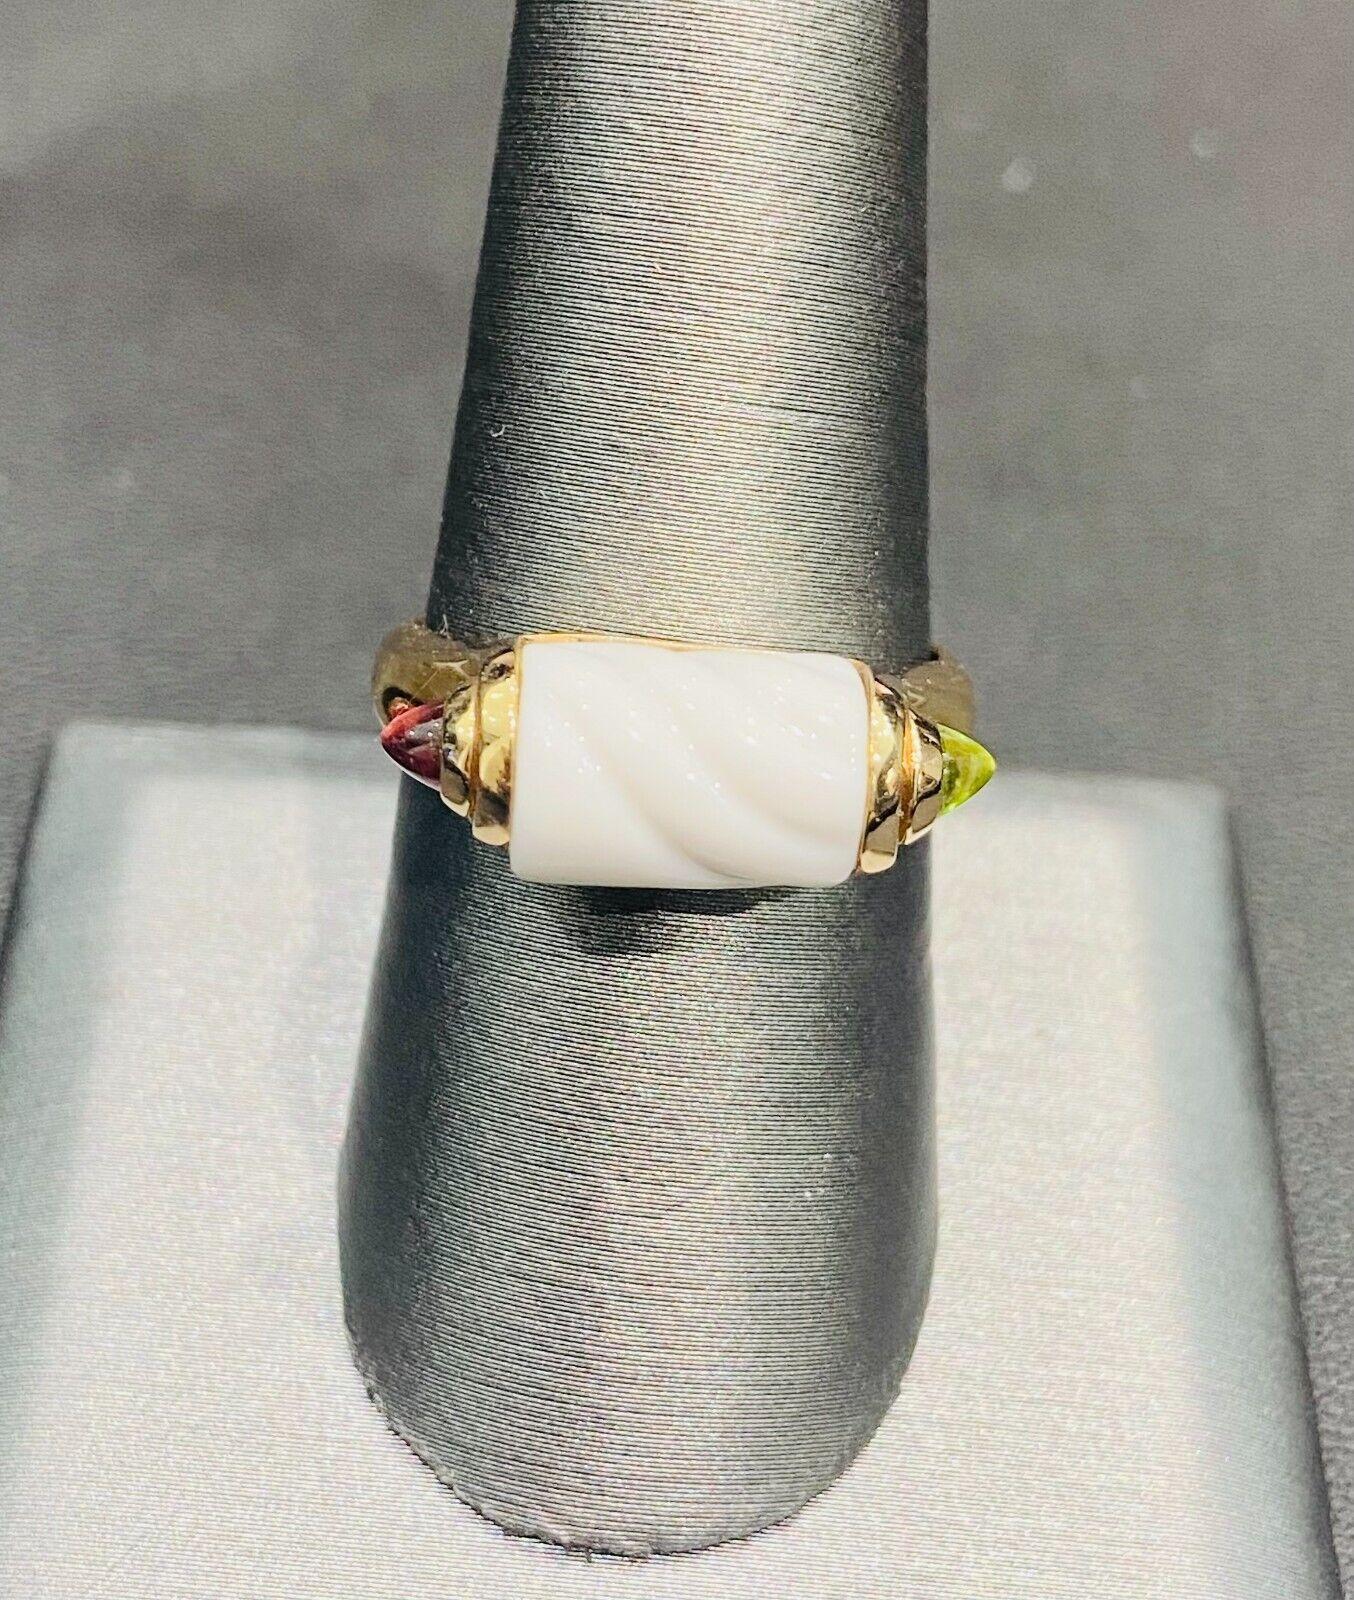 Bvlgari Italy Chandra Collection 18k Yellow Gold, Ceramic, Tourmaline & Peridot Ring Circa 1980s Vintage

Here is your chance to purchase a beautiful and highly collectible designer ring.  
BVLGARI Tronchetto Ring 

White Ceramic Chandra with 18k